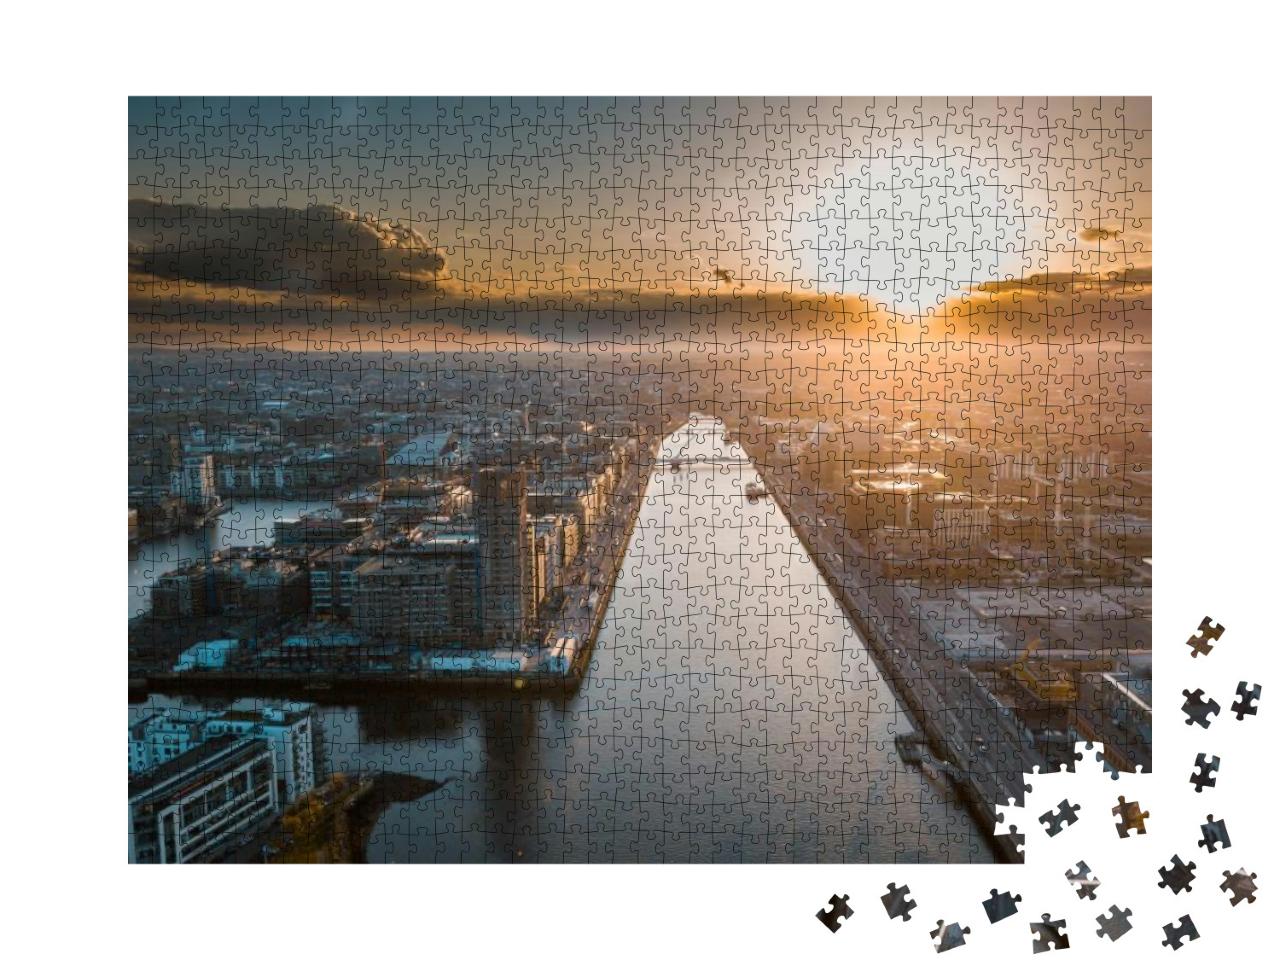 Sunset in Dublin, Drone Photography... Jigsaw Puzzle with 1000 pieces